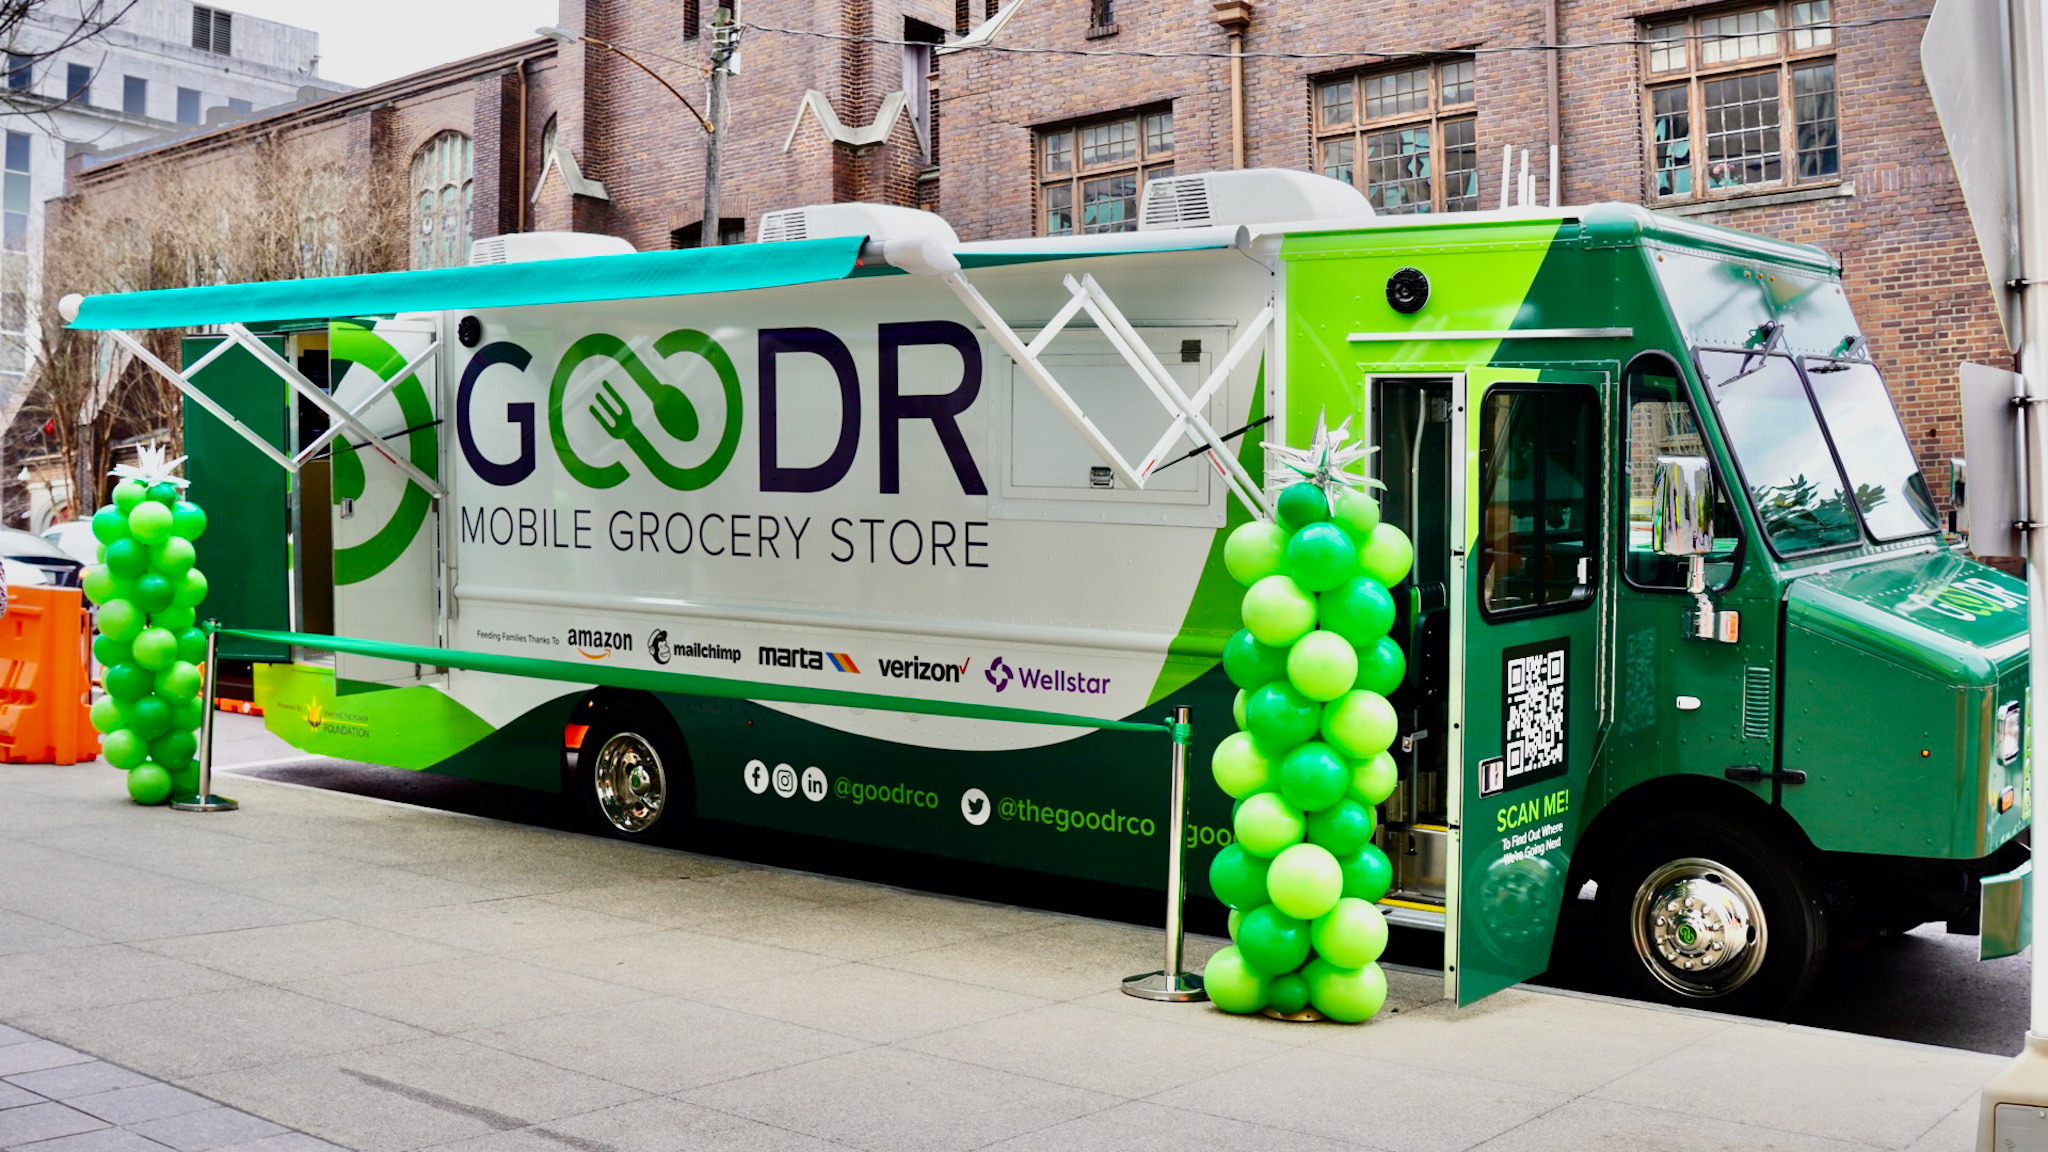 Goodr Mobile Grocery Store 